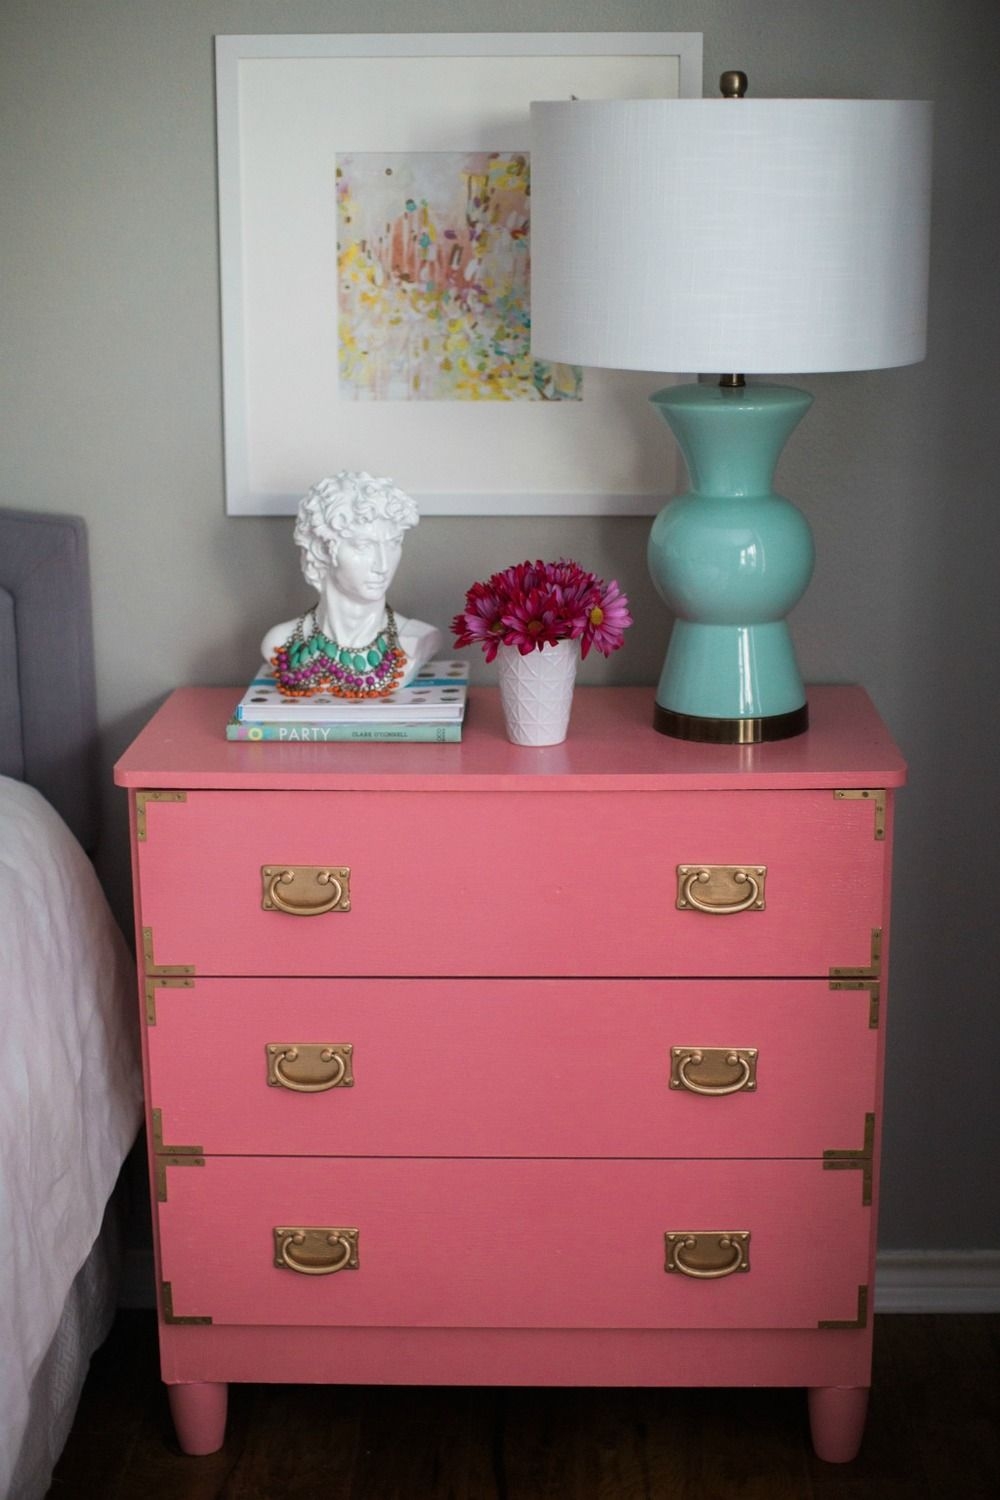 Bedroom styling ideas small dresser as bedside table for more